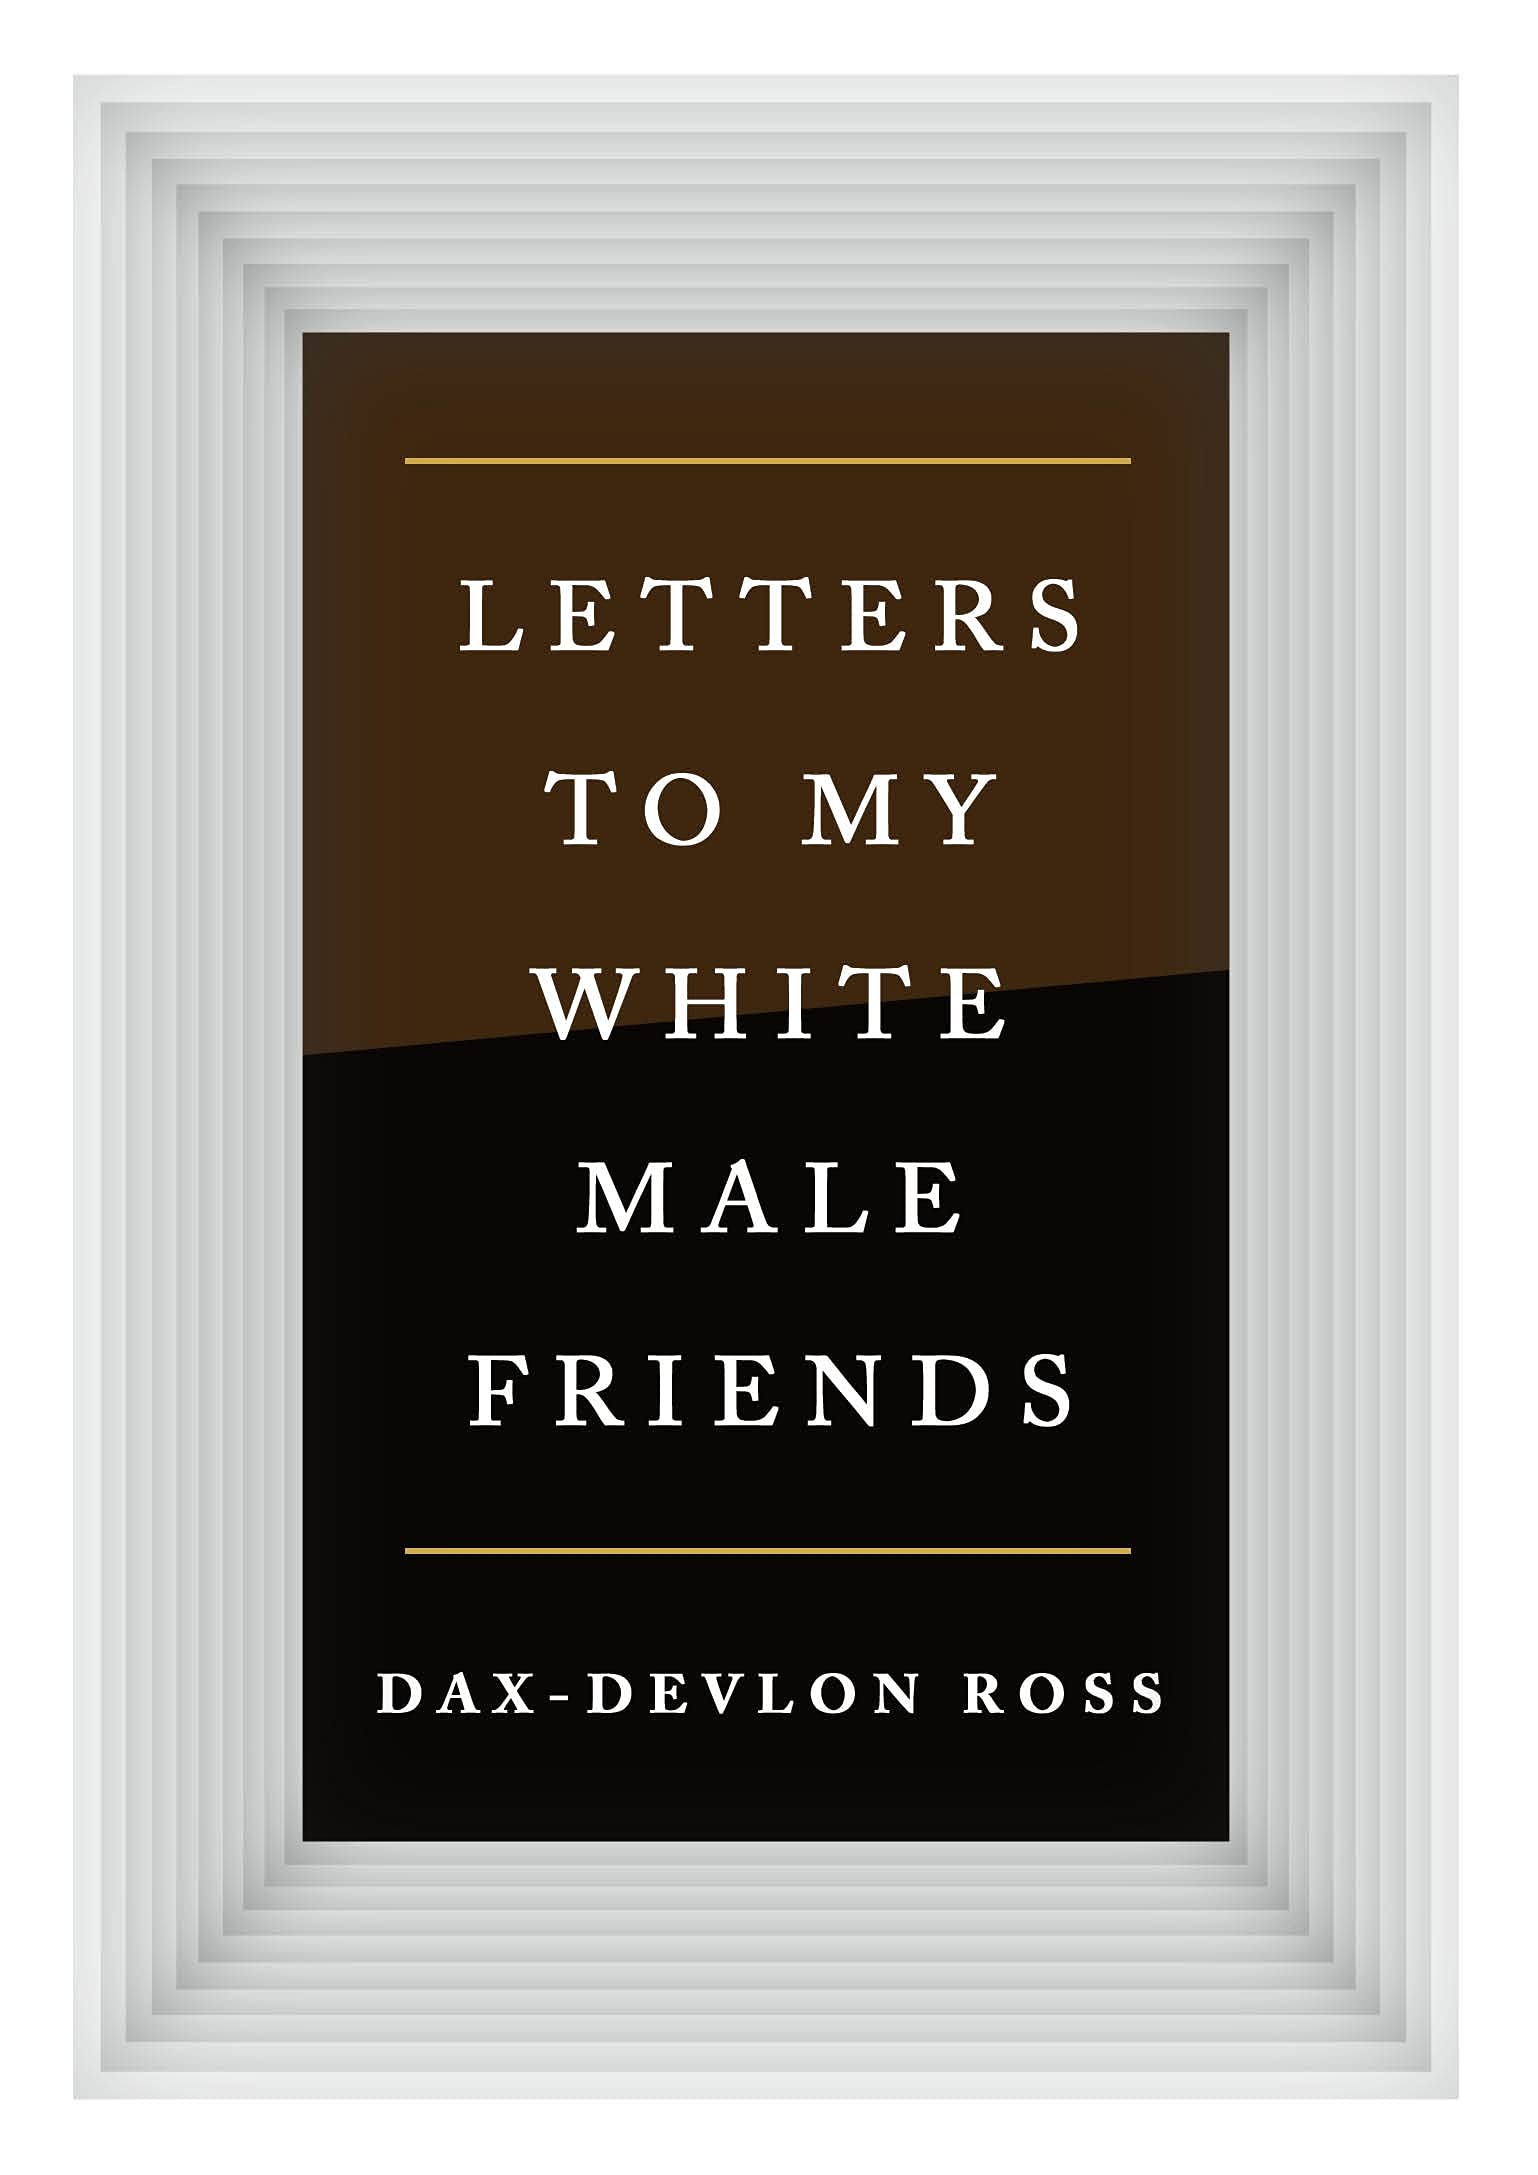 Letter to My White Male Friends